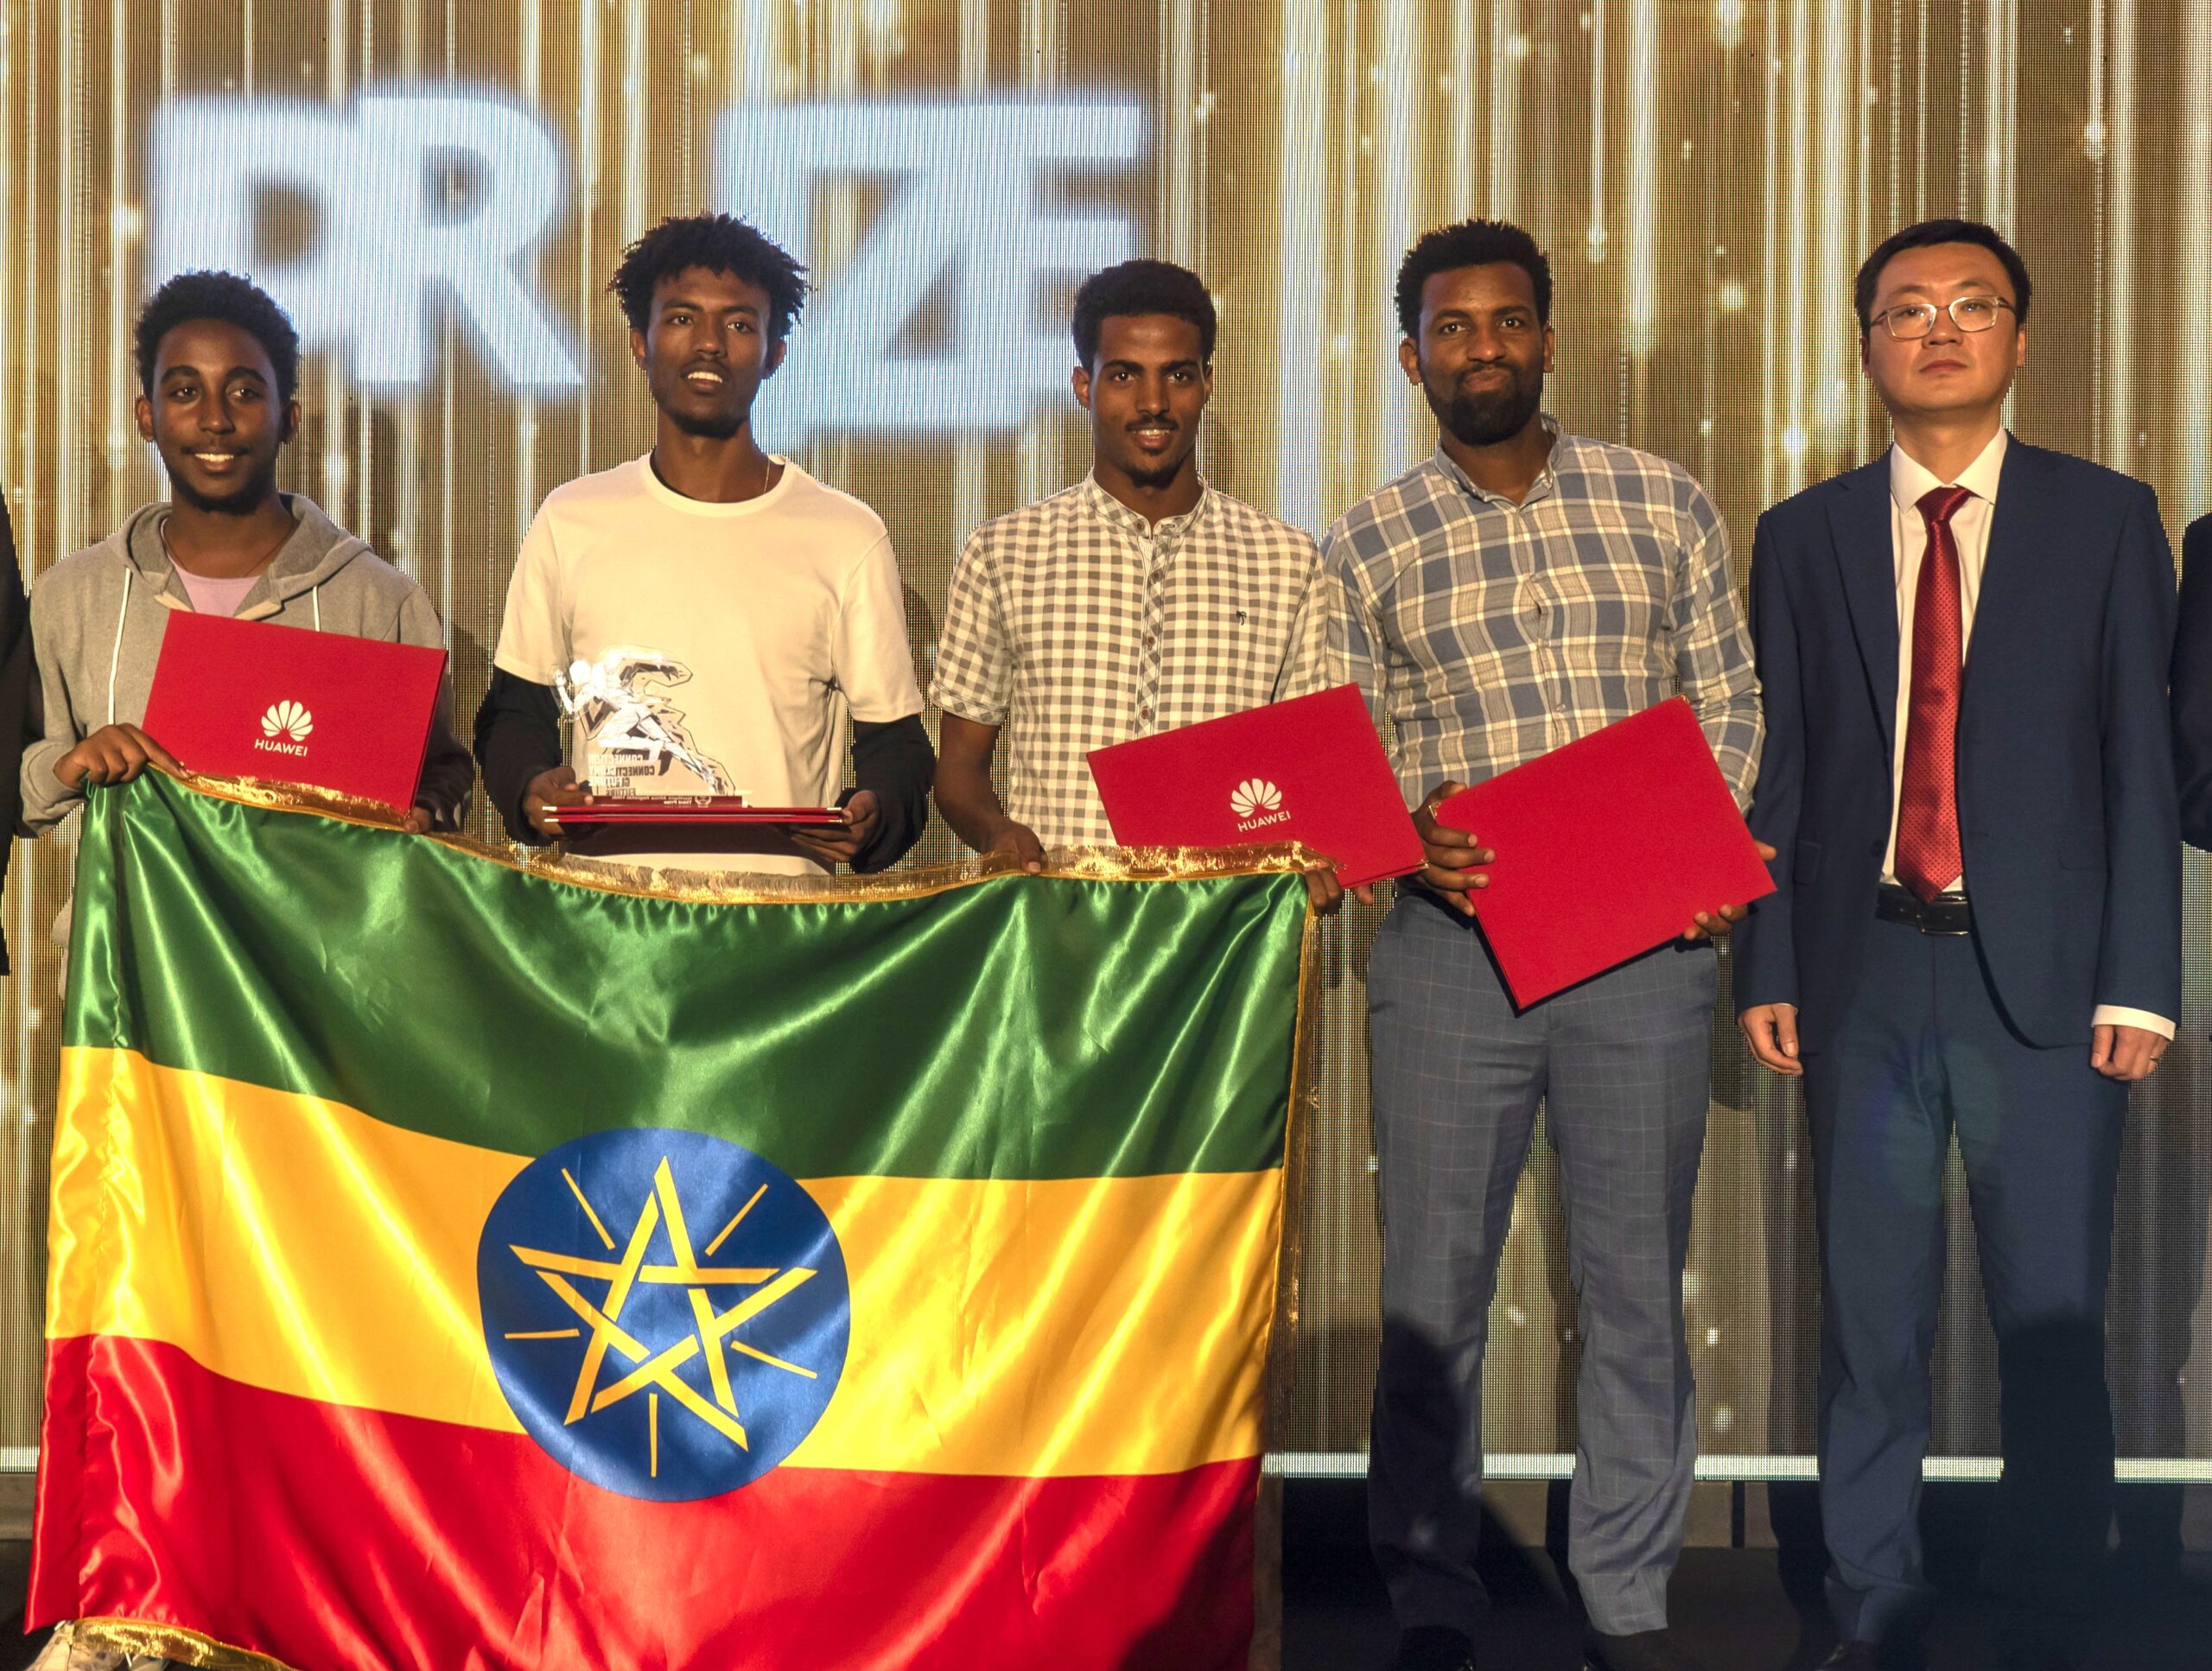 The Ethiopian team won third place in the regional final of the Huawei ICT competition in Tunisia.